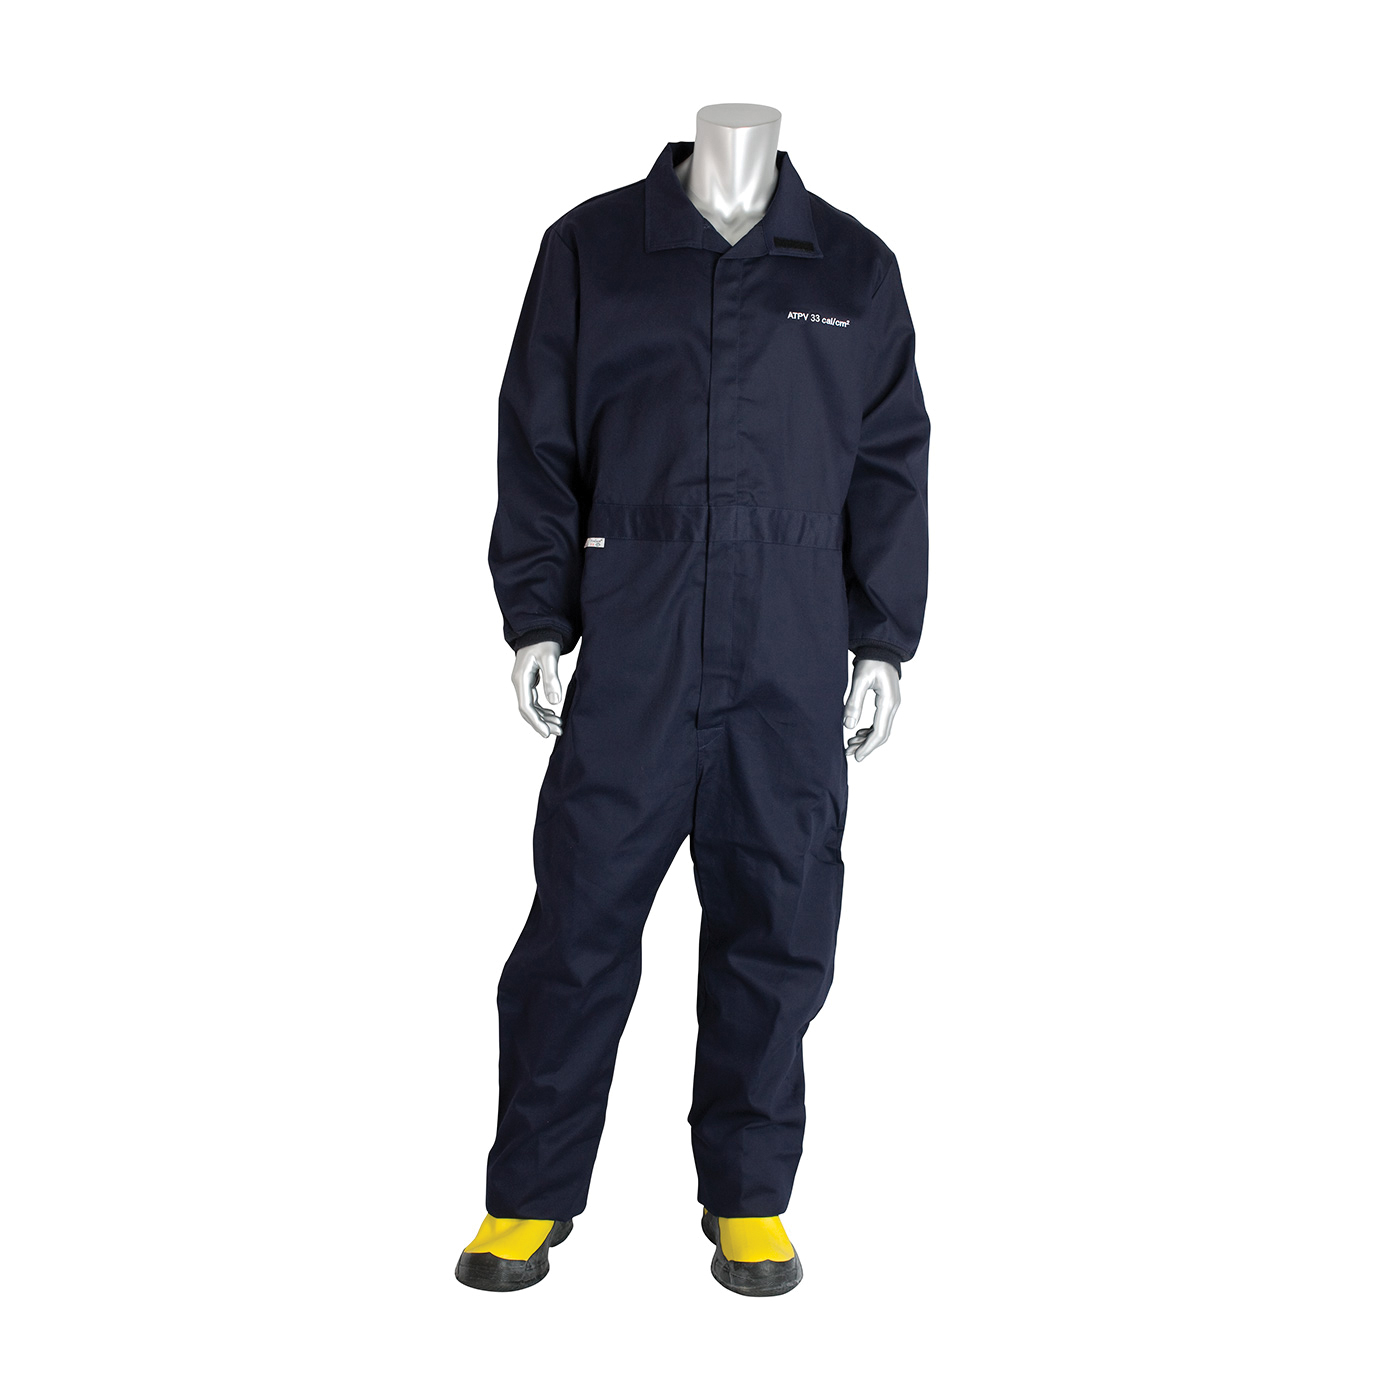 PIP® 9100-52758/XL Flame Resistant Coverall, XL, Navy, 88% Cotton/12% Nylon, 48 to 50 in Chest, 32 in L Inseam